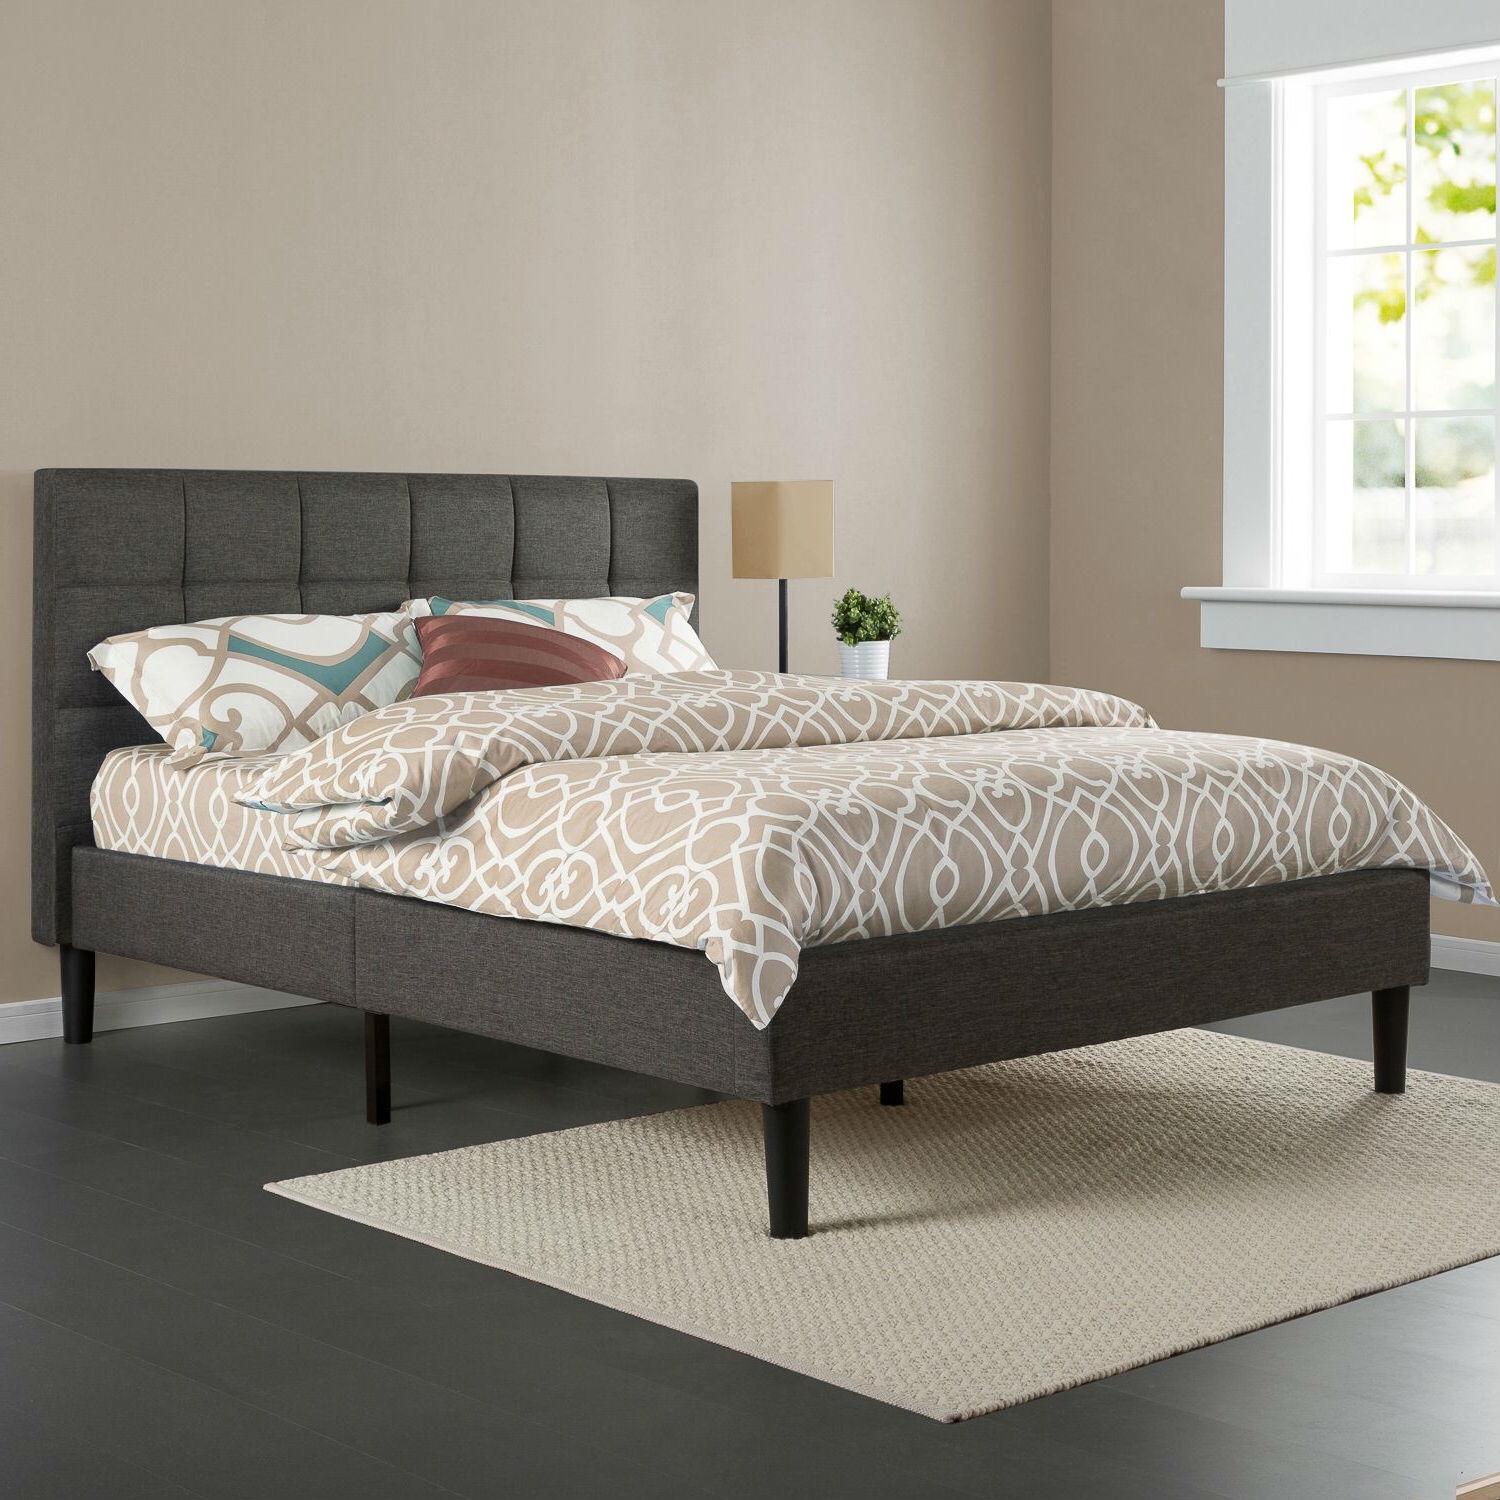 full size platform bed frame with headboard perfect upholstered platform bed queen JFXKESN